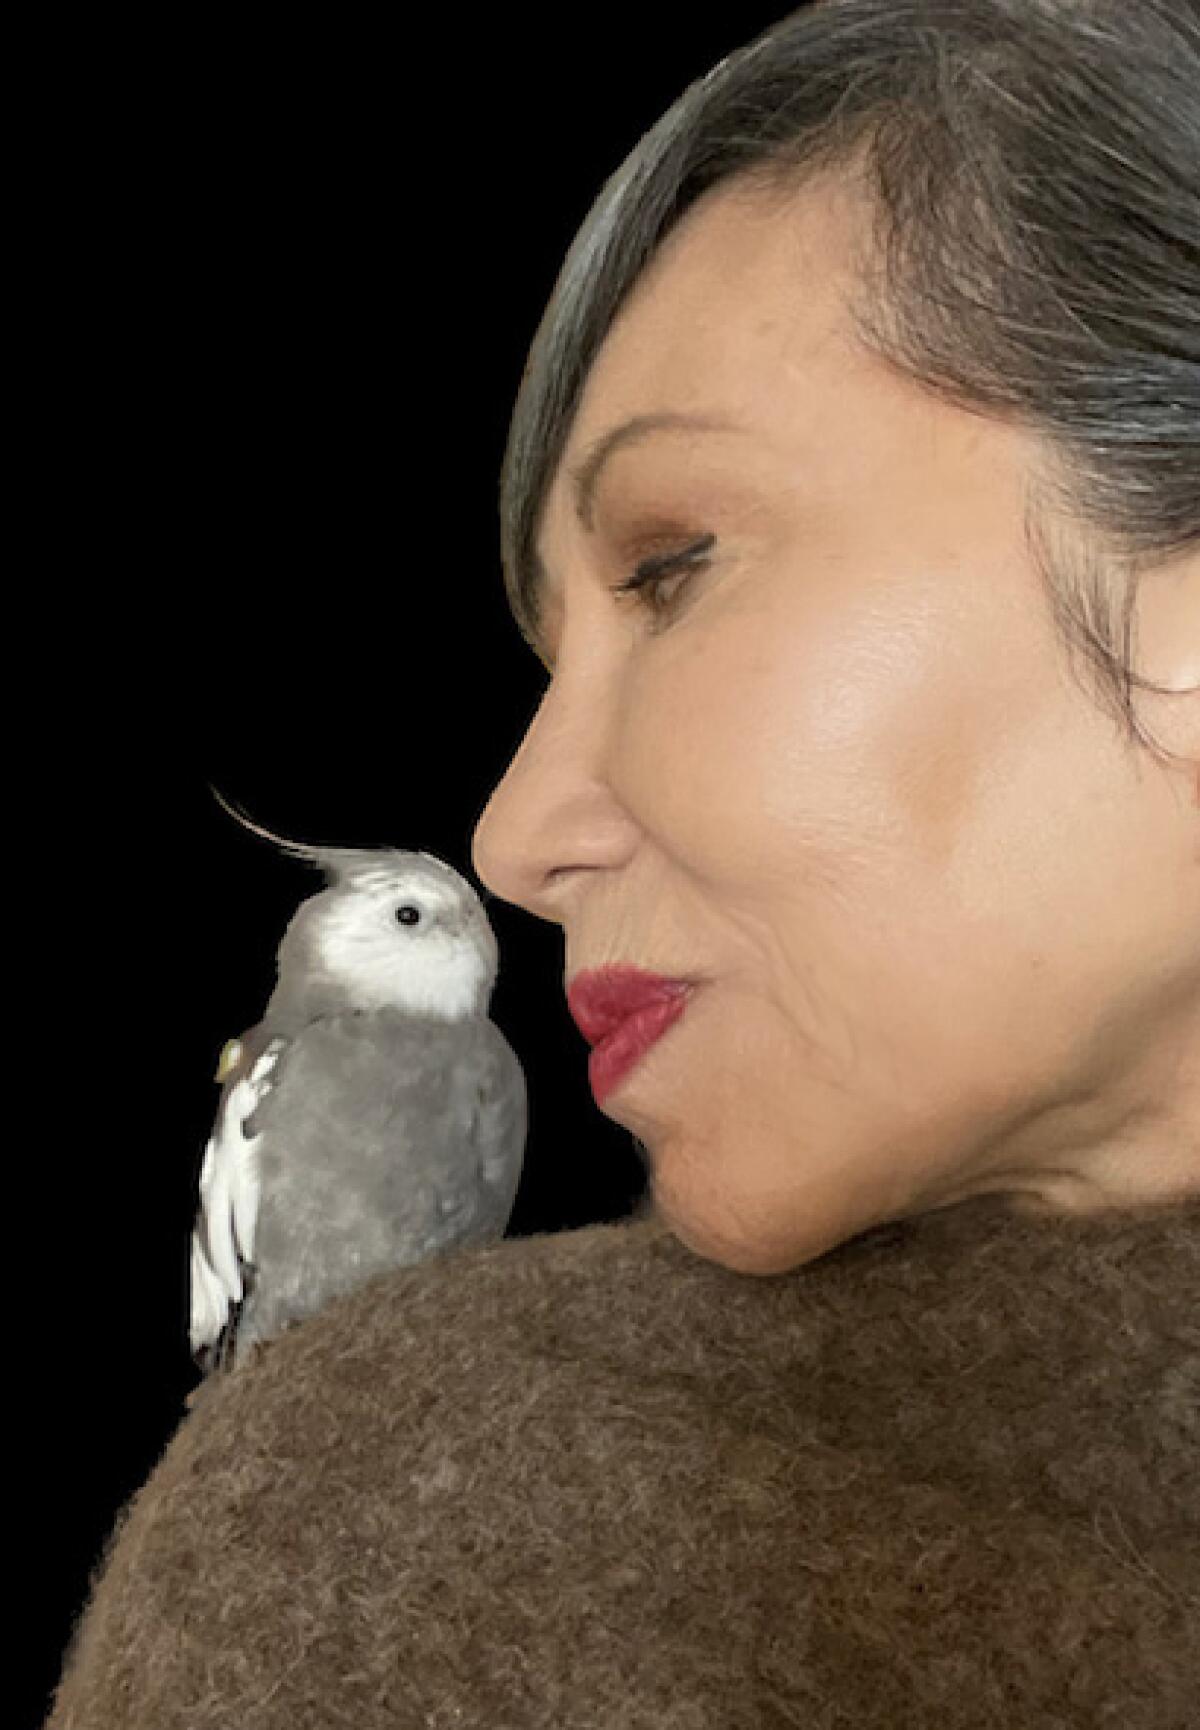 Amy Tan and friend.